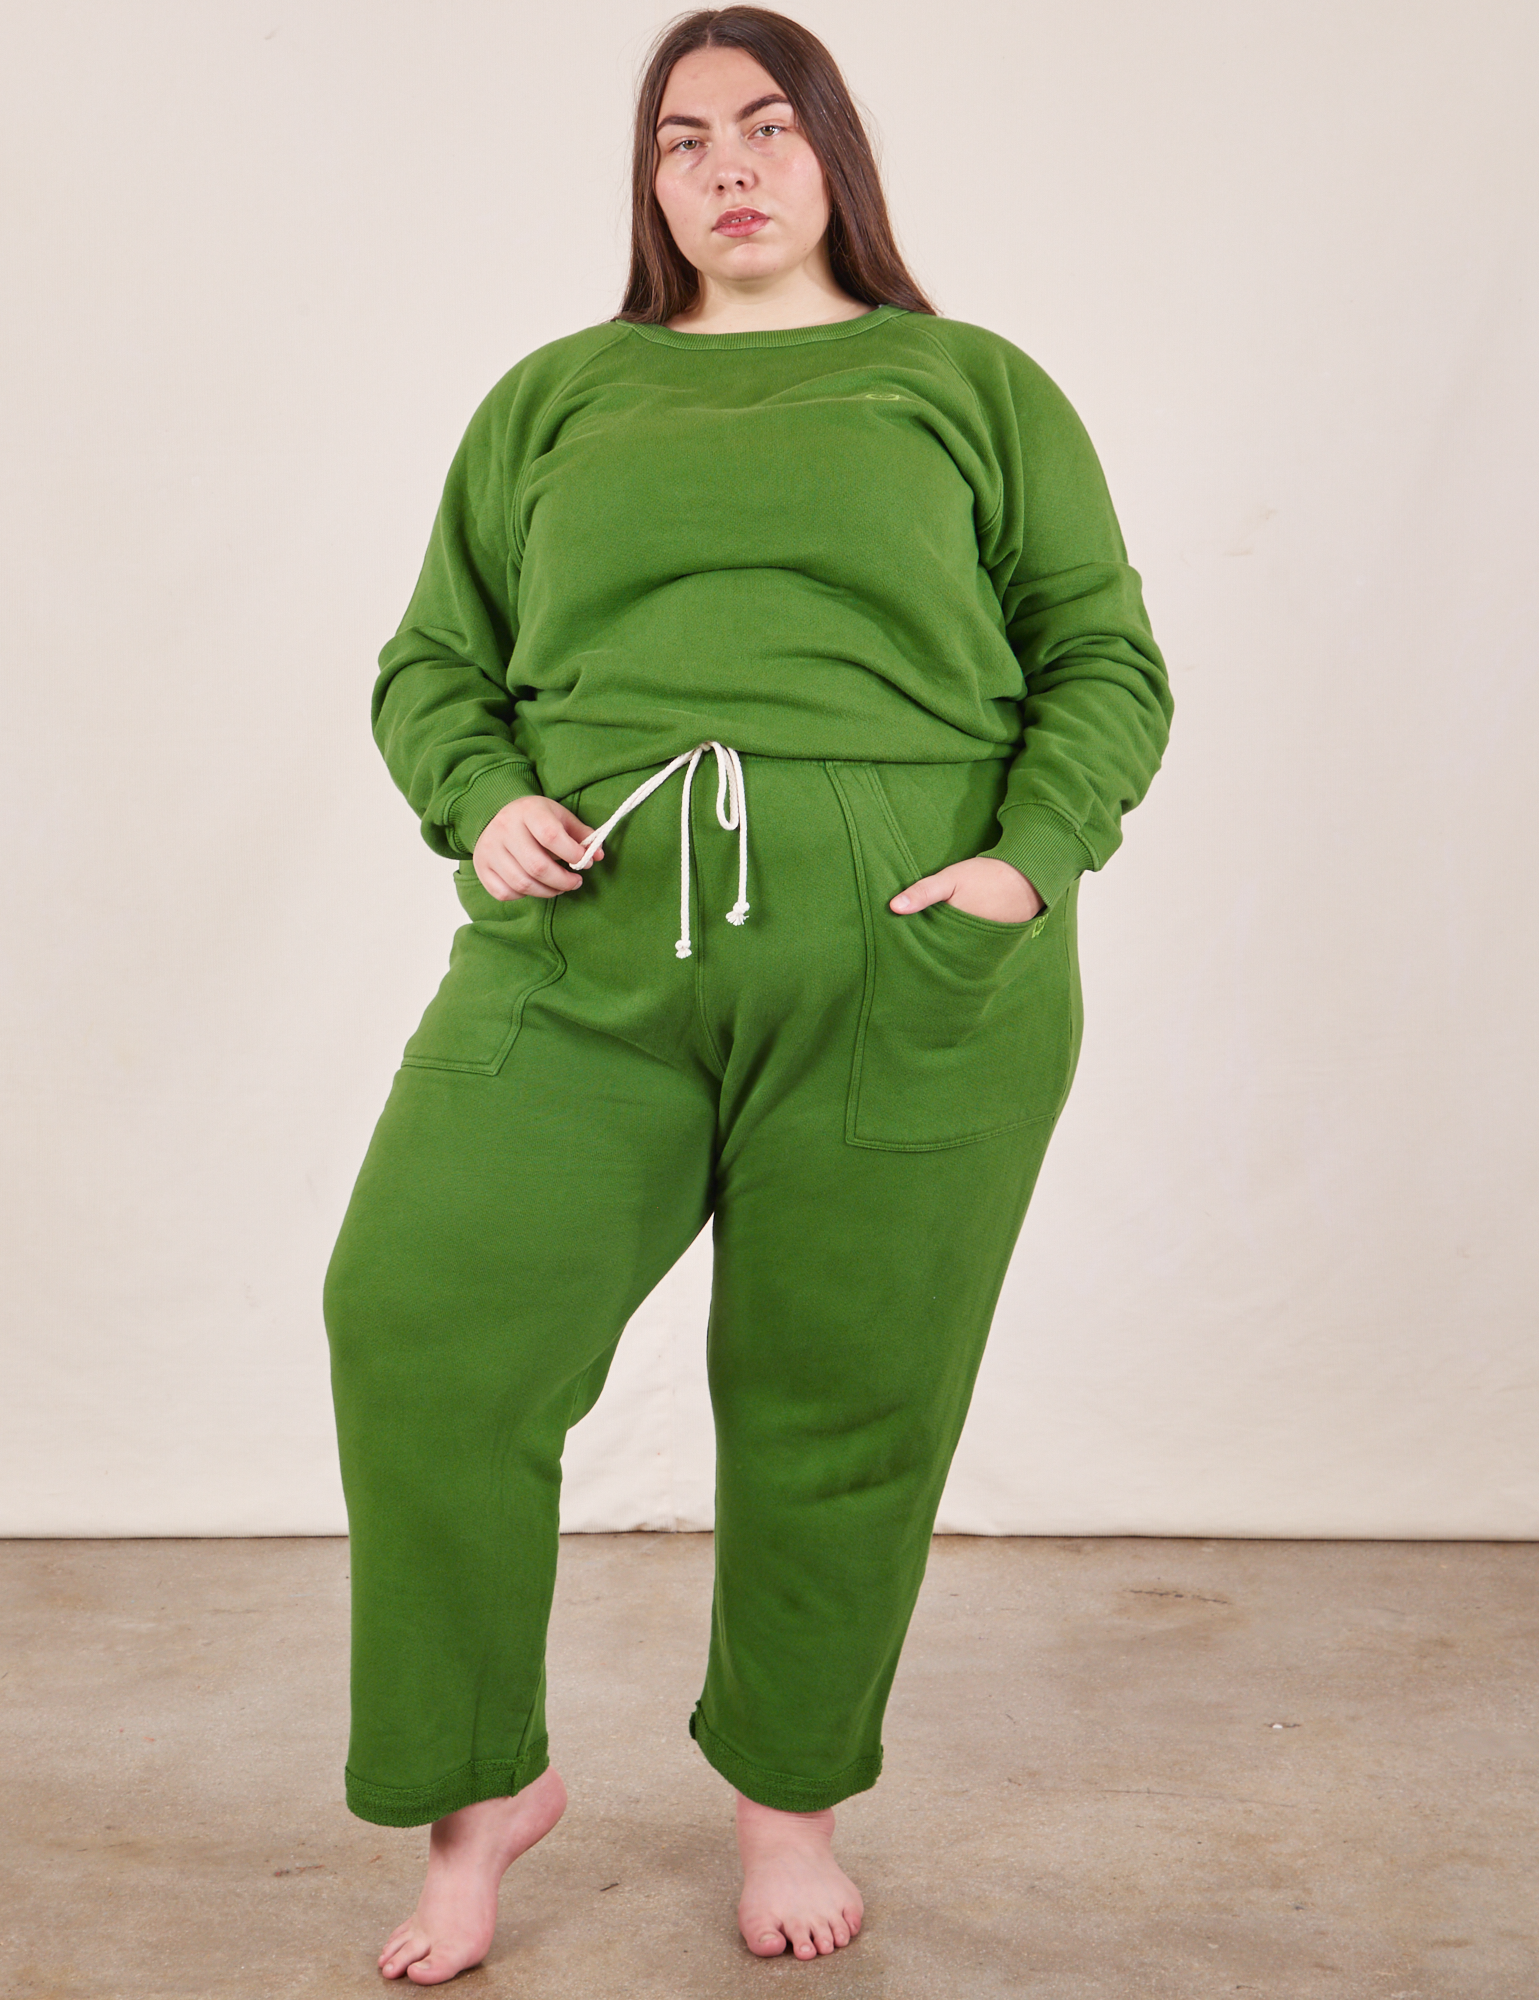 Marielena is wearing Heavyweight Crew in Lawn Green and matching Cropped Rolled Cuff Sweatpants